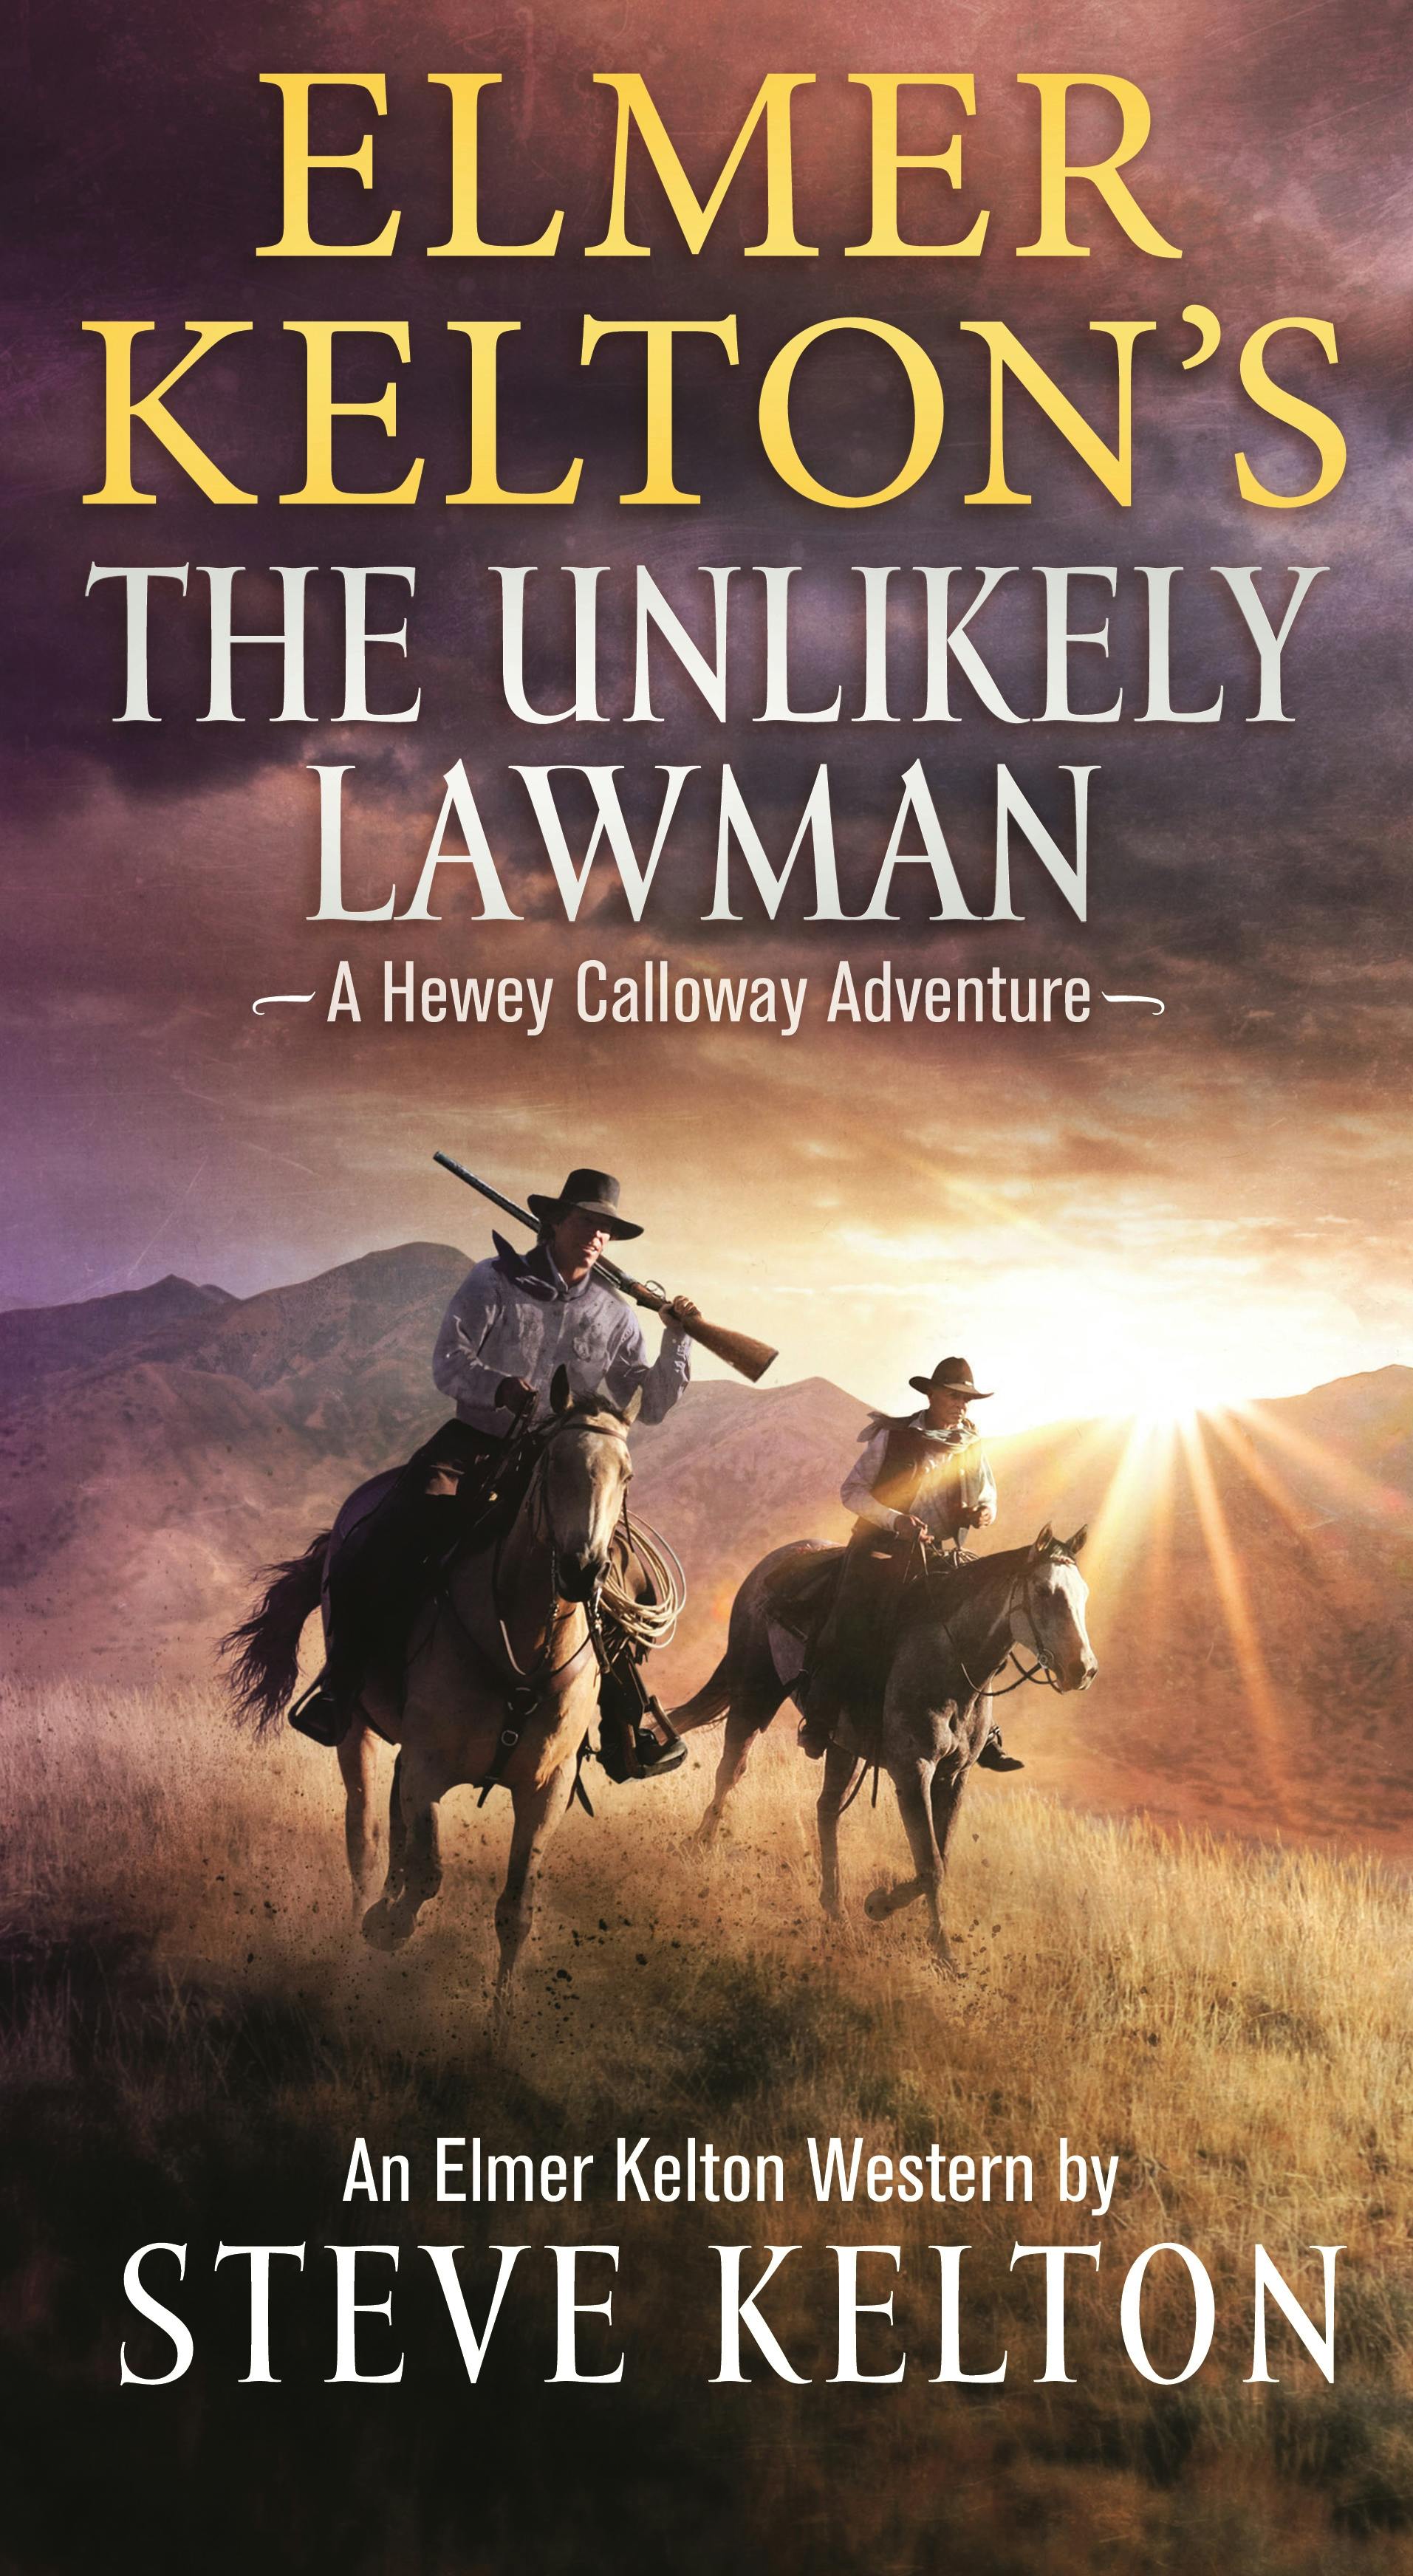 Cover for the book titled as: Elmer Kelton's The Unlikely Lawman